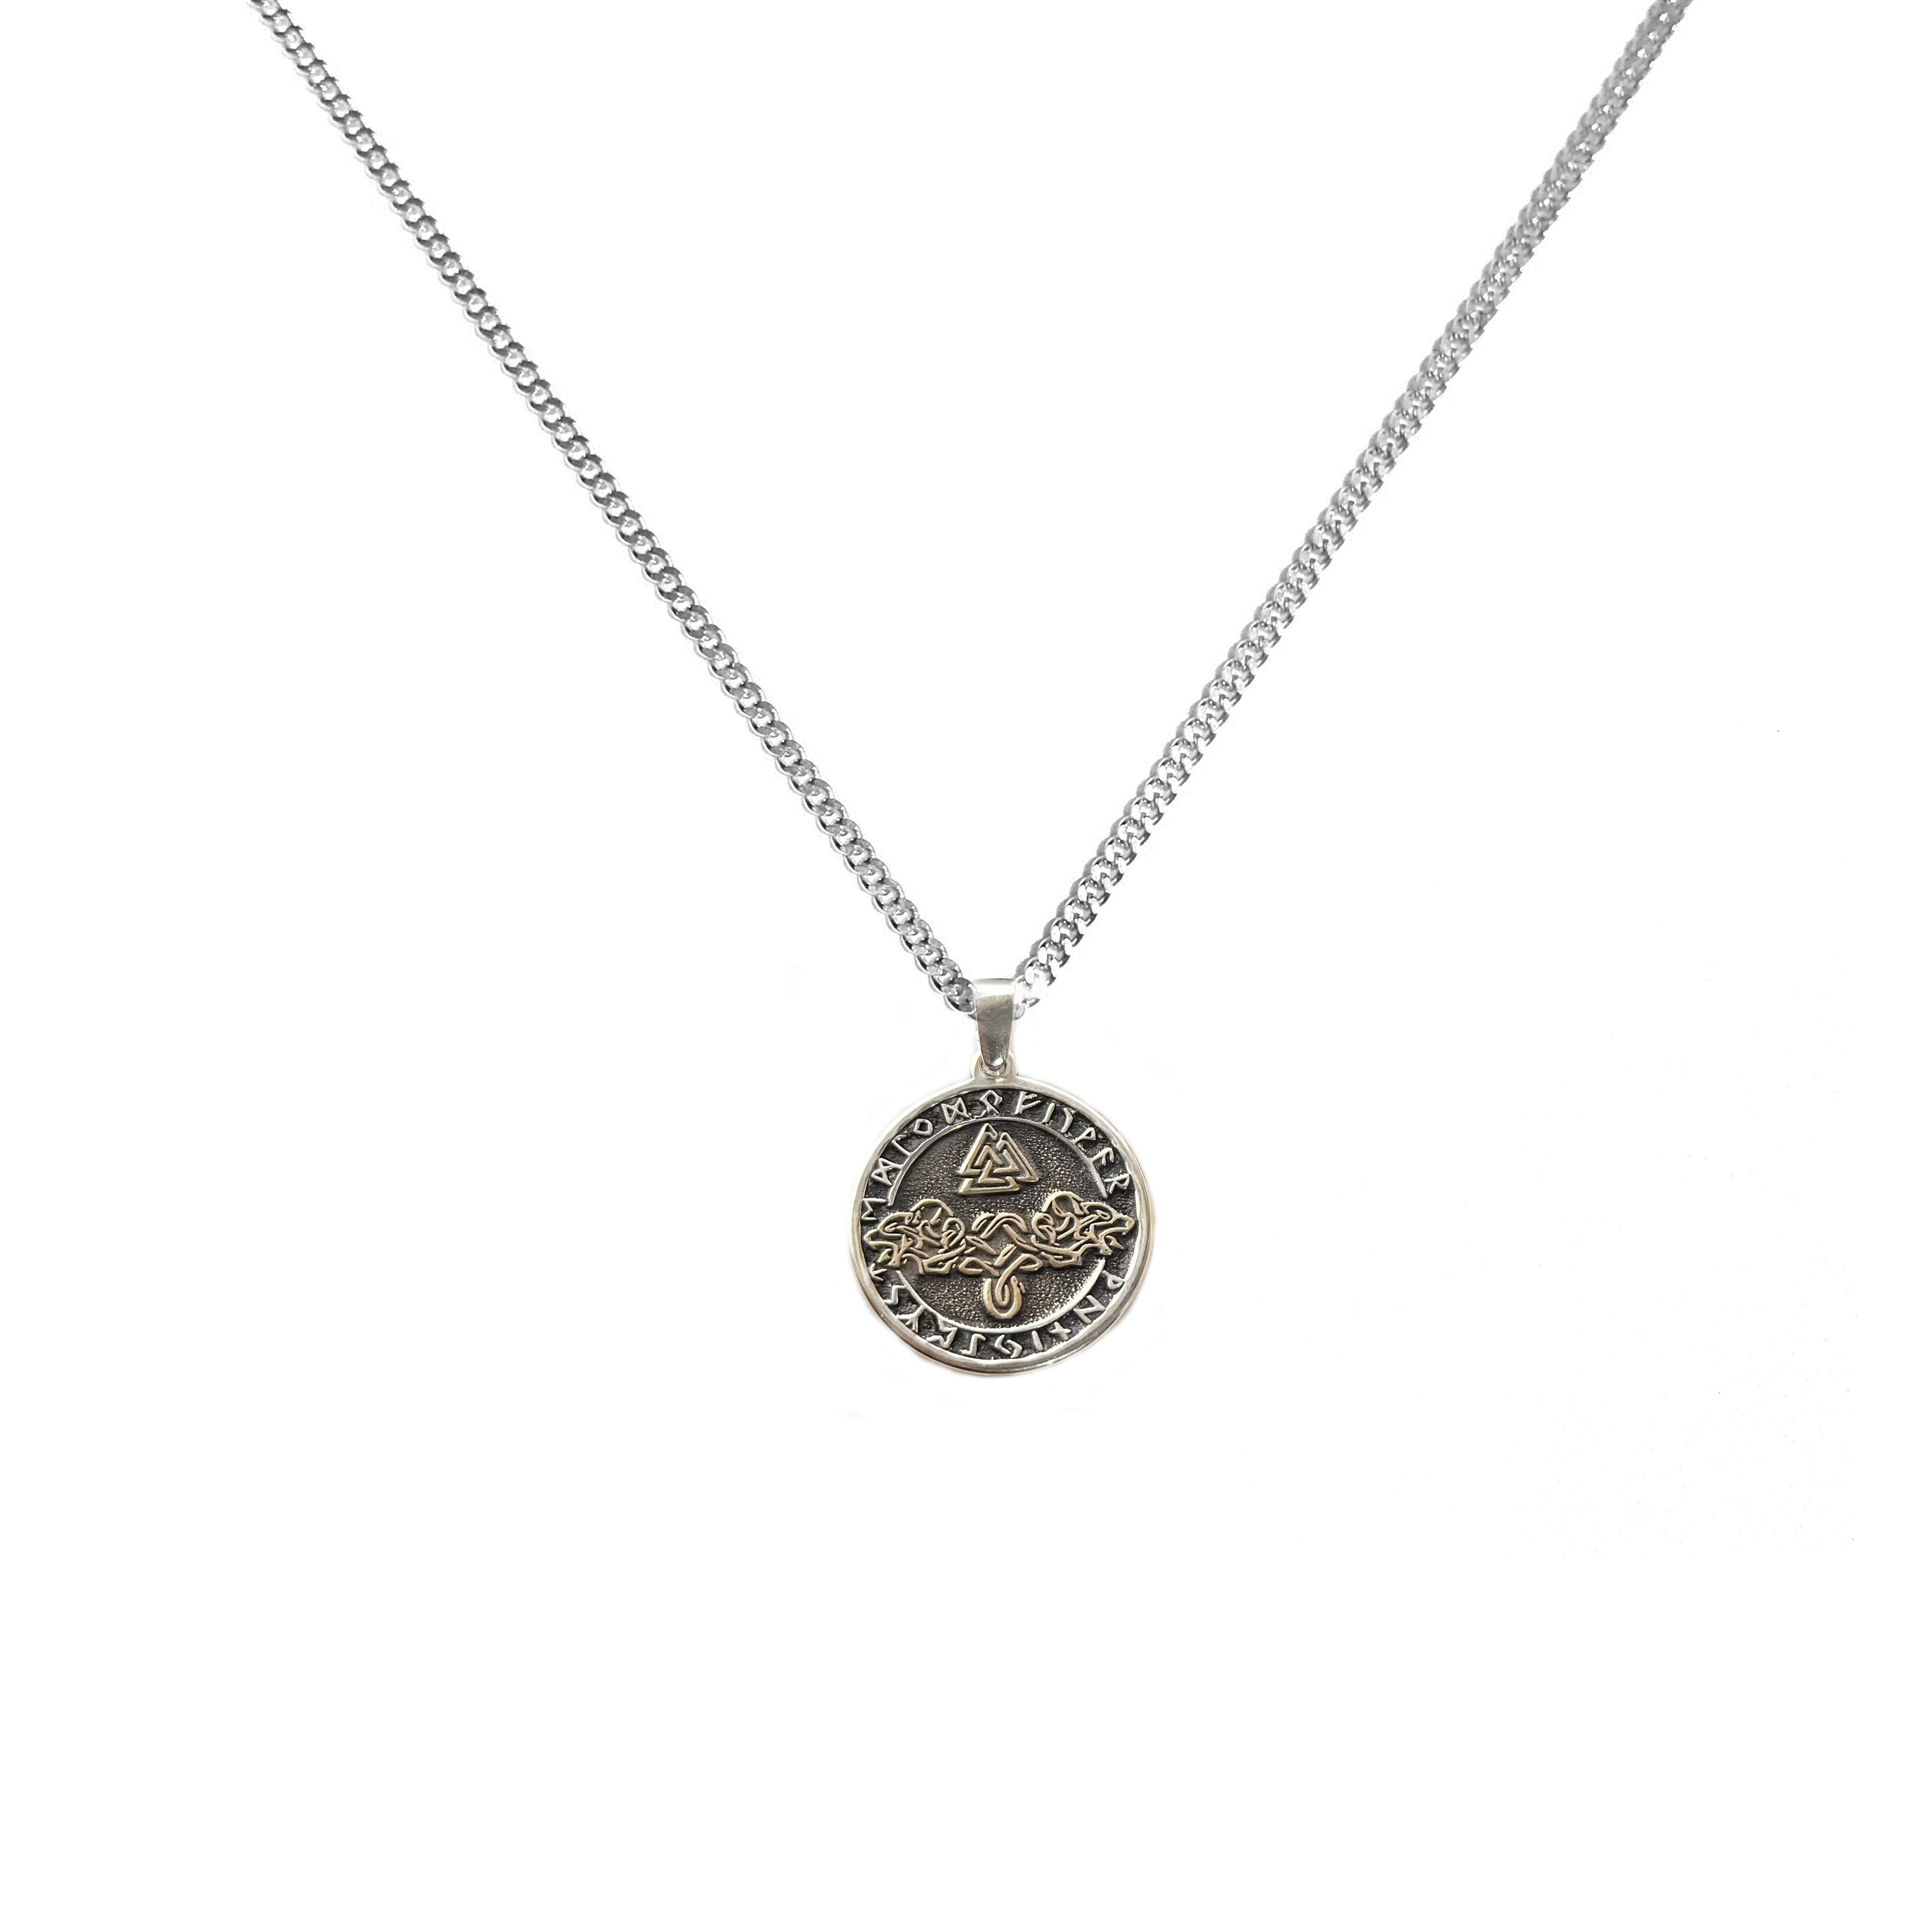 Personalized Silhouette Medallion